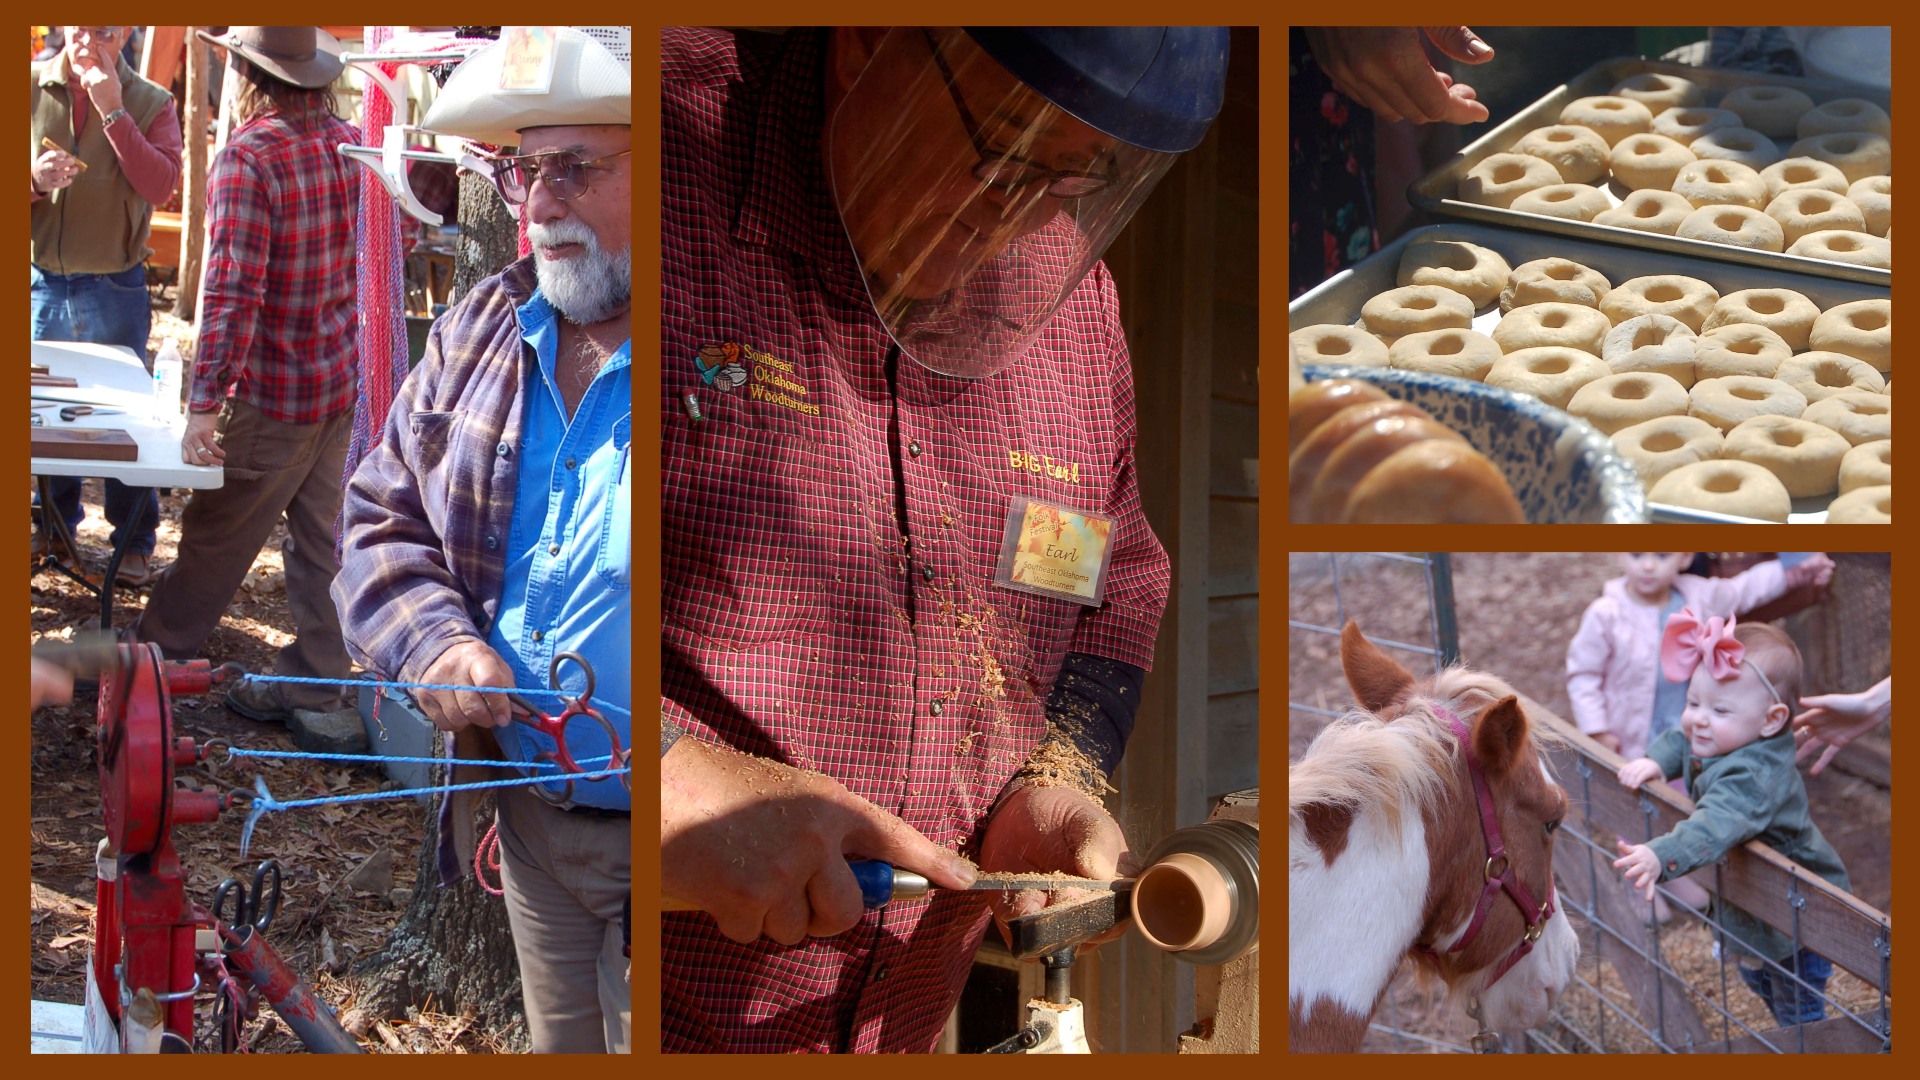 Collage of 4 images: 1- gentleman making rope. 2 - gentleman wood turning on a lathe, 3 - making home made doughnuts, 4 - Baby petting a pony.